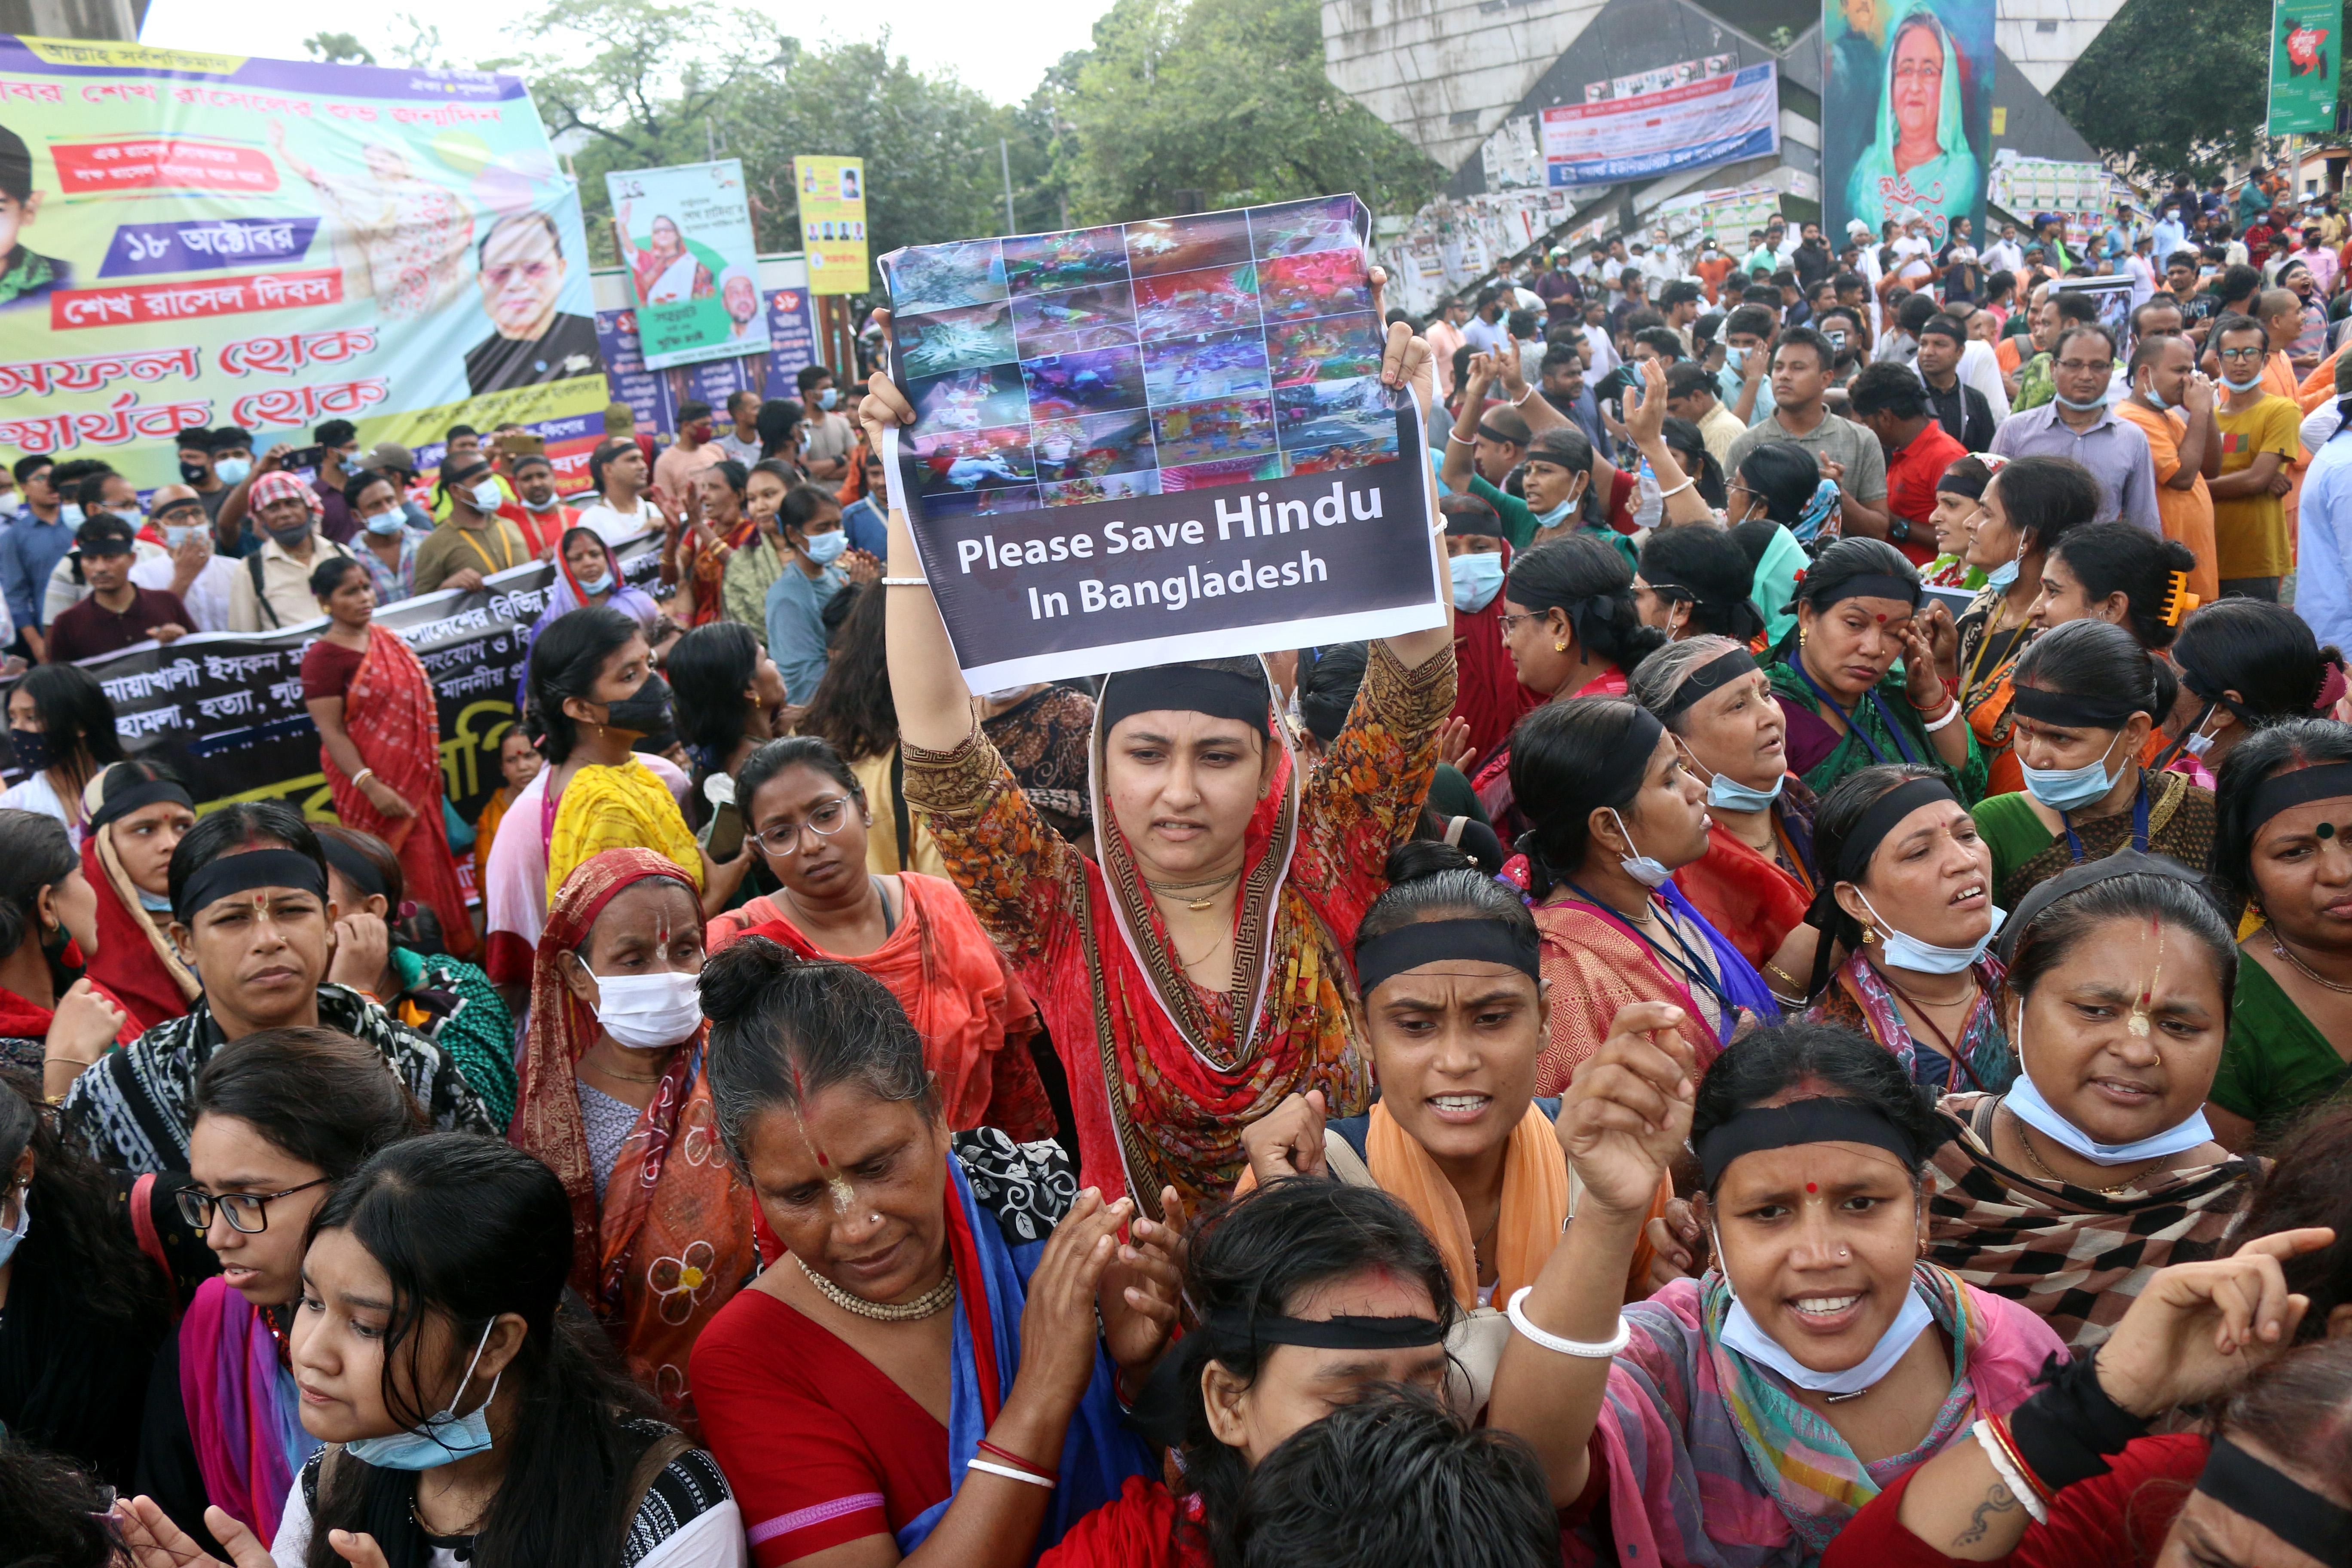 Thousands of activists marched in the Bangladeshi capital Dhaka on Tuesday to denounce a wave of violence against minority Hindus over an allegedly blasphemous social media post in the predominantly Muslim South Asian country.